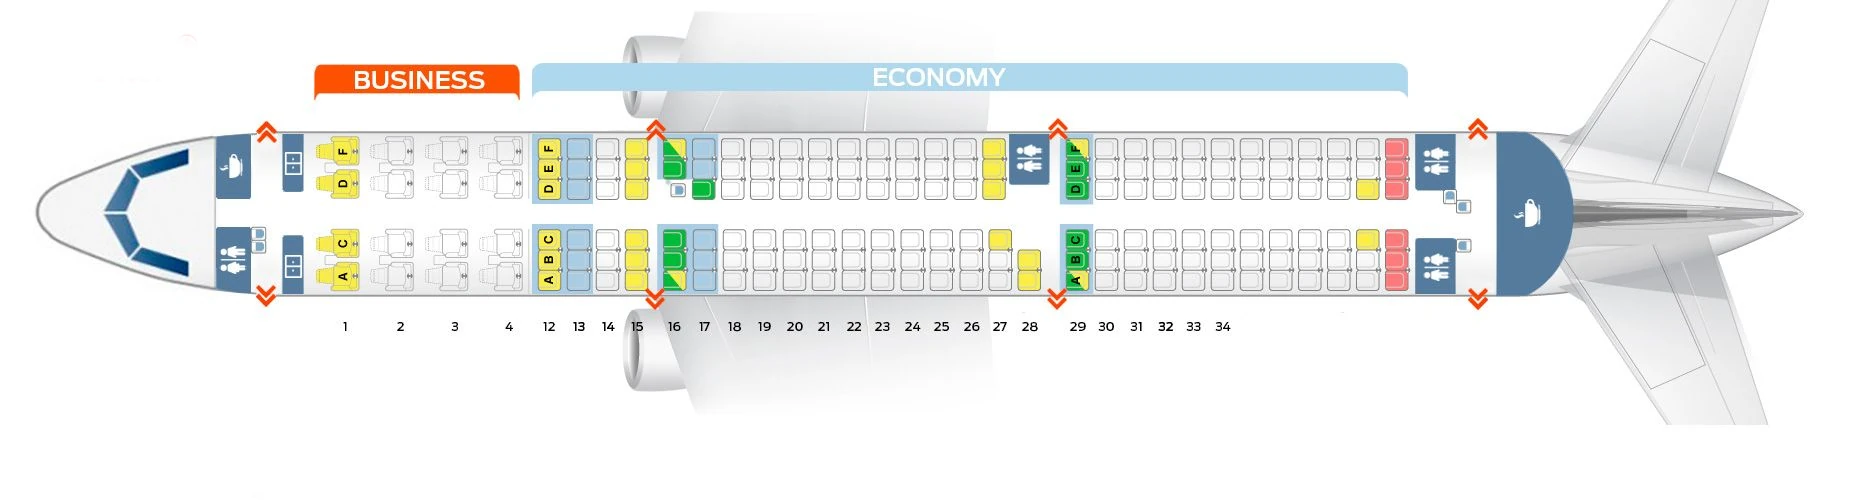 Airbus A321 seat map